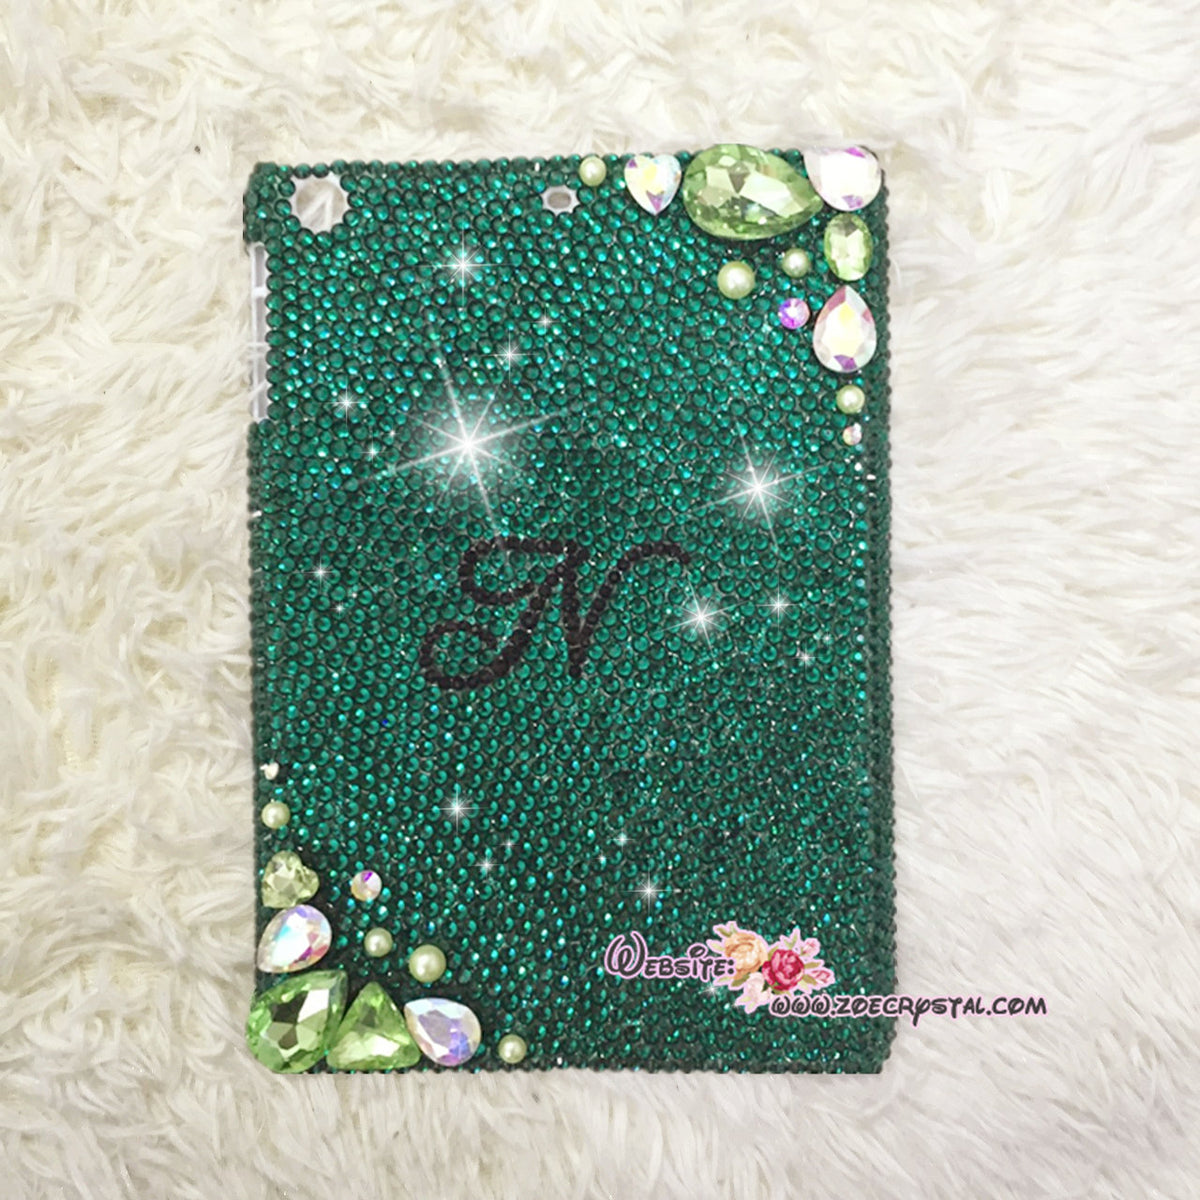 Bedazzled Bling iPAD CASE / Cover with Green Swarovski or Czech crystal (iPad air, iPad pro, iPad mini are available)Strass Sparkly Stylish